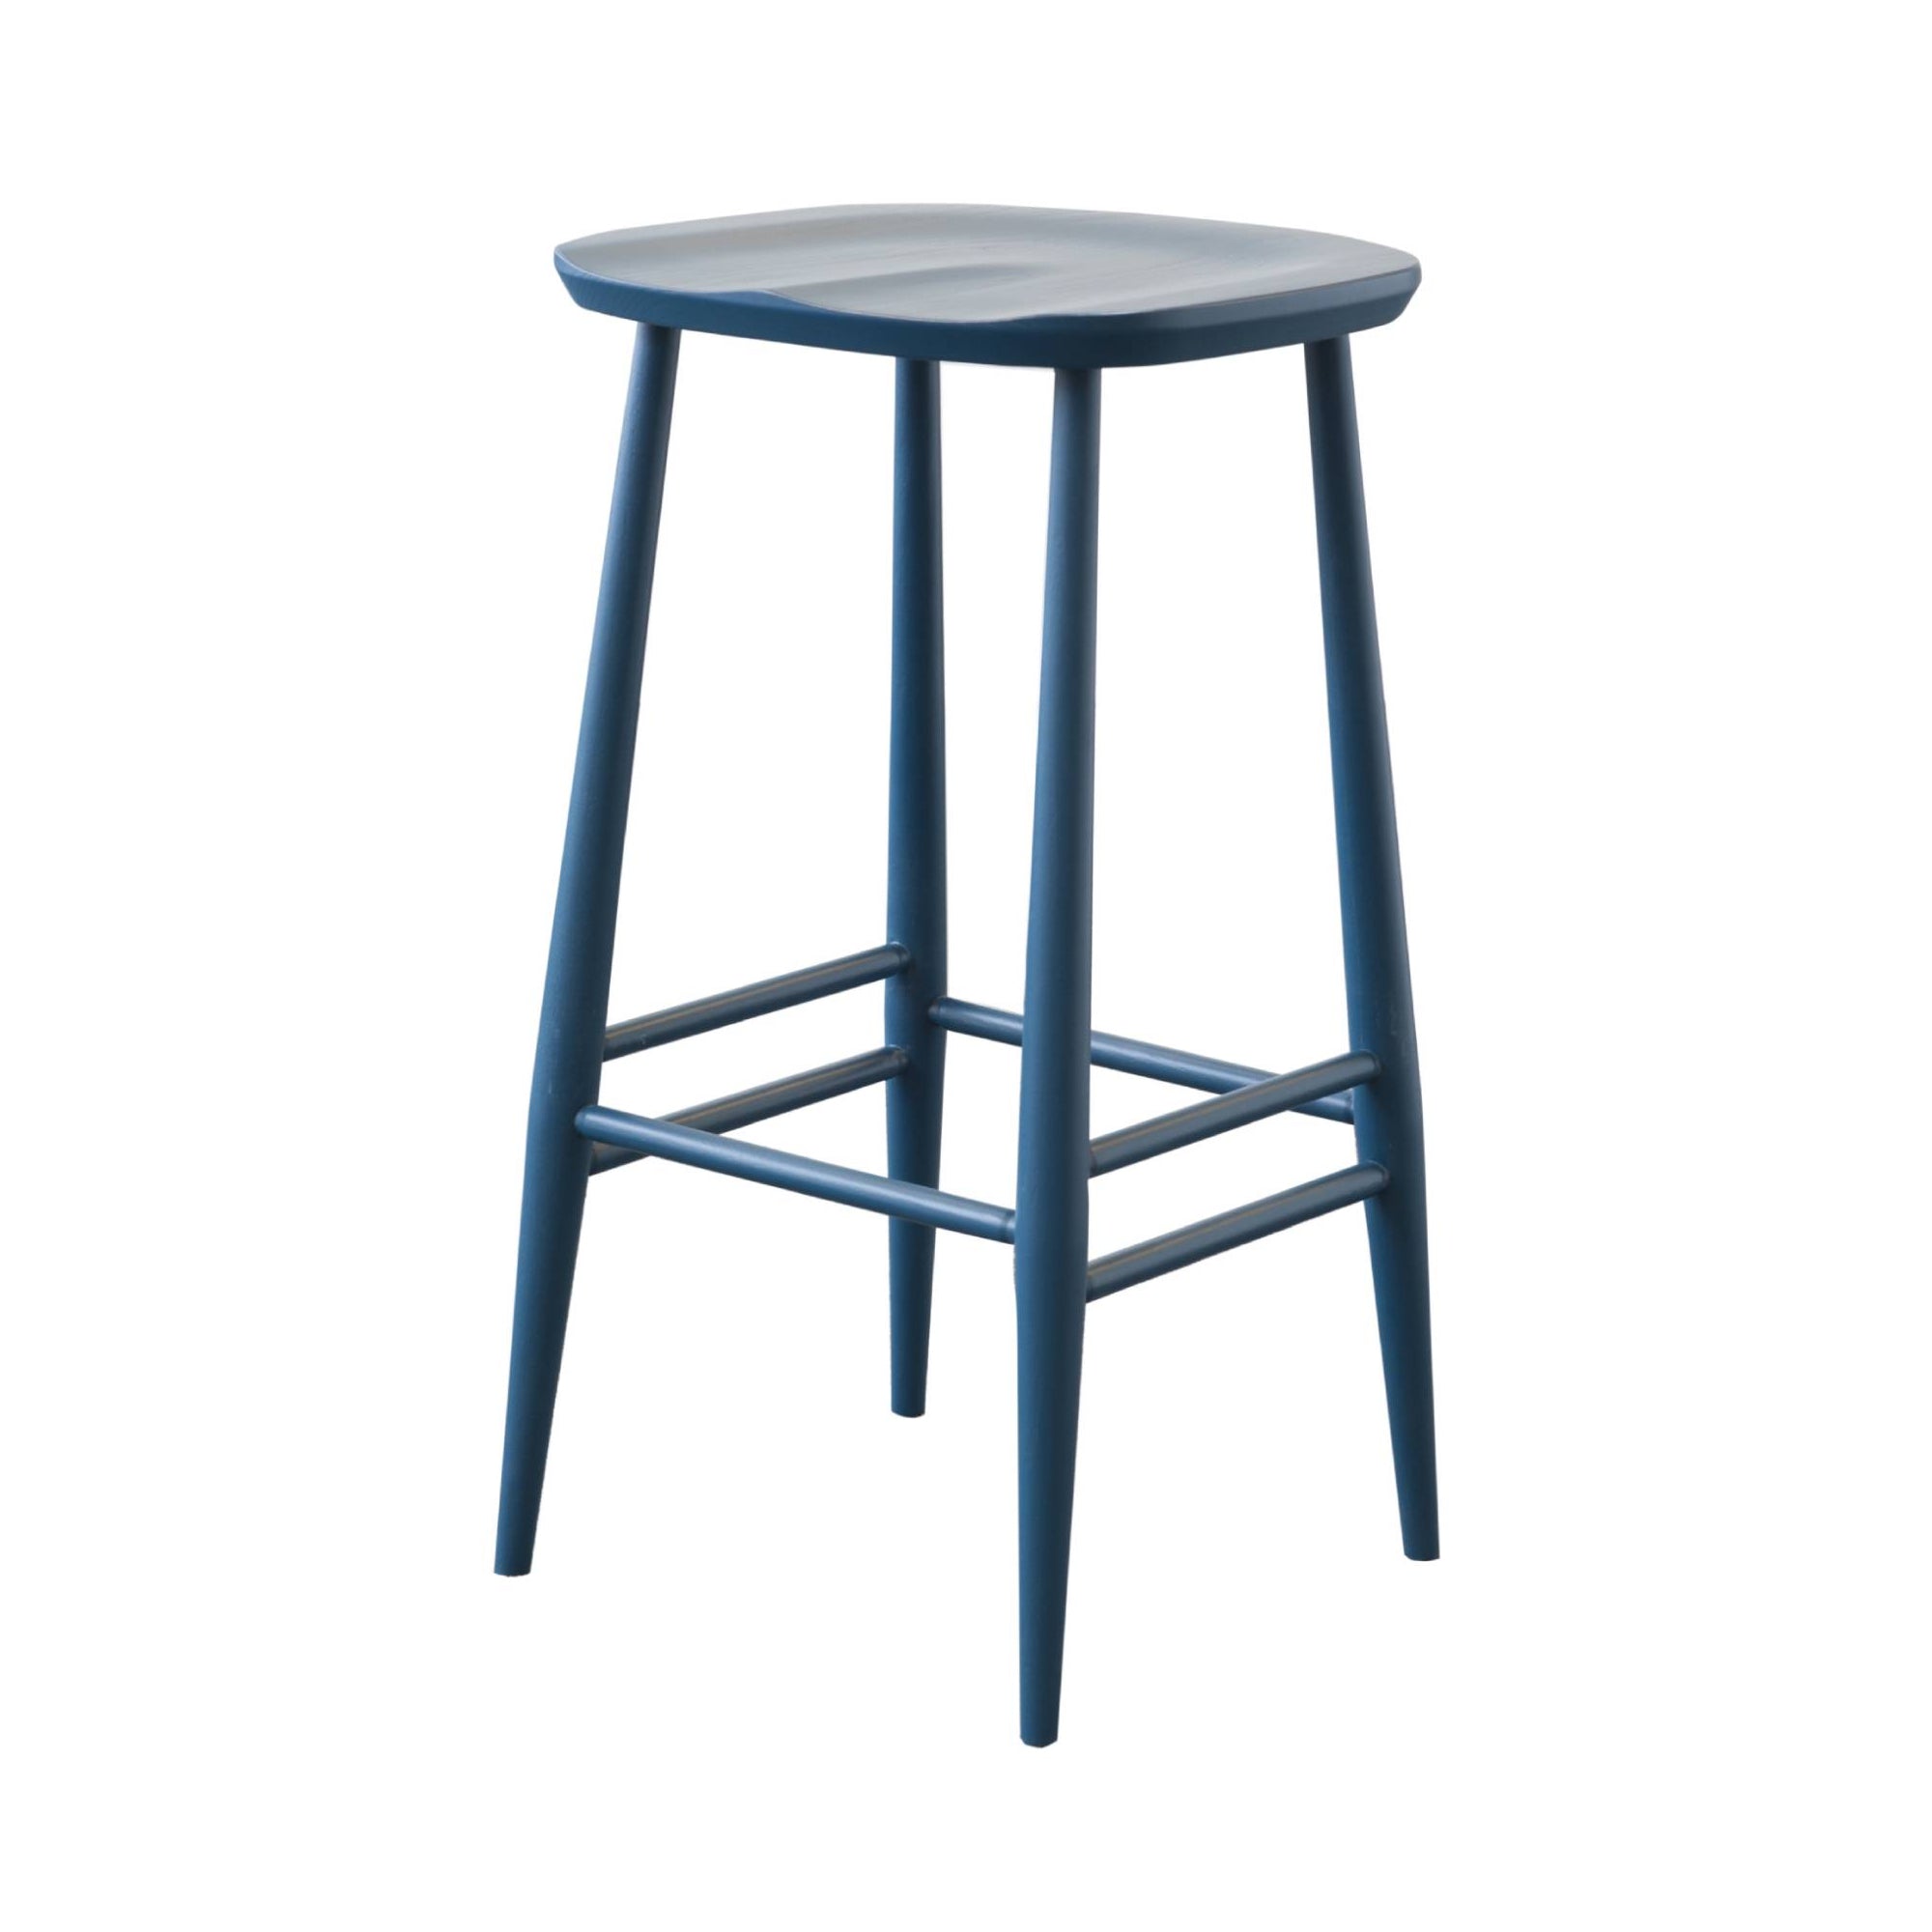 Originals Utility Bar + Counter Stool: Bar + Stained Oceanic